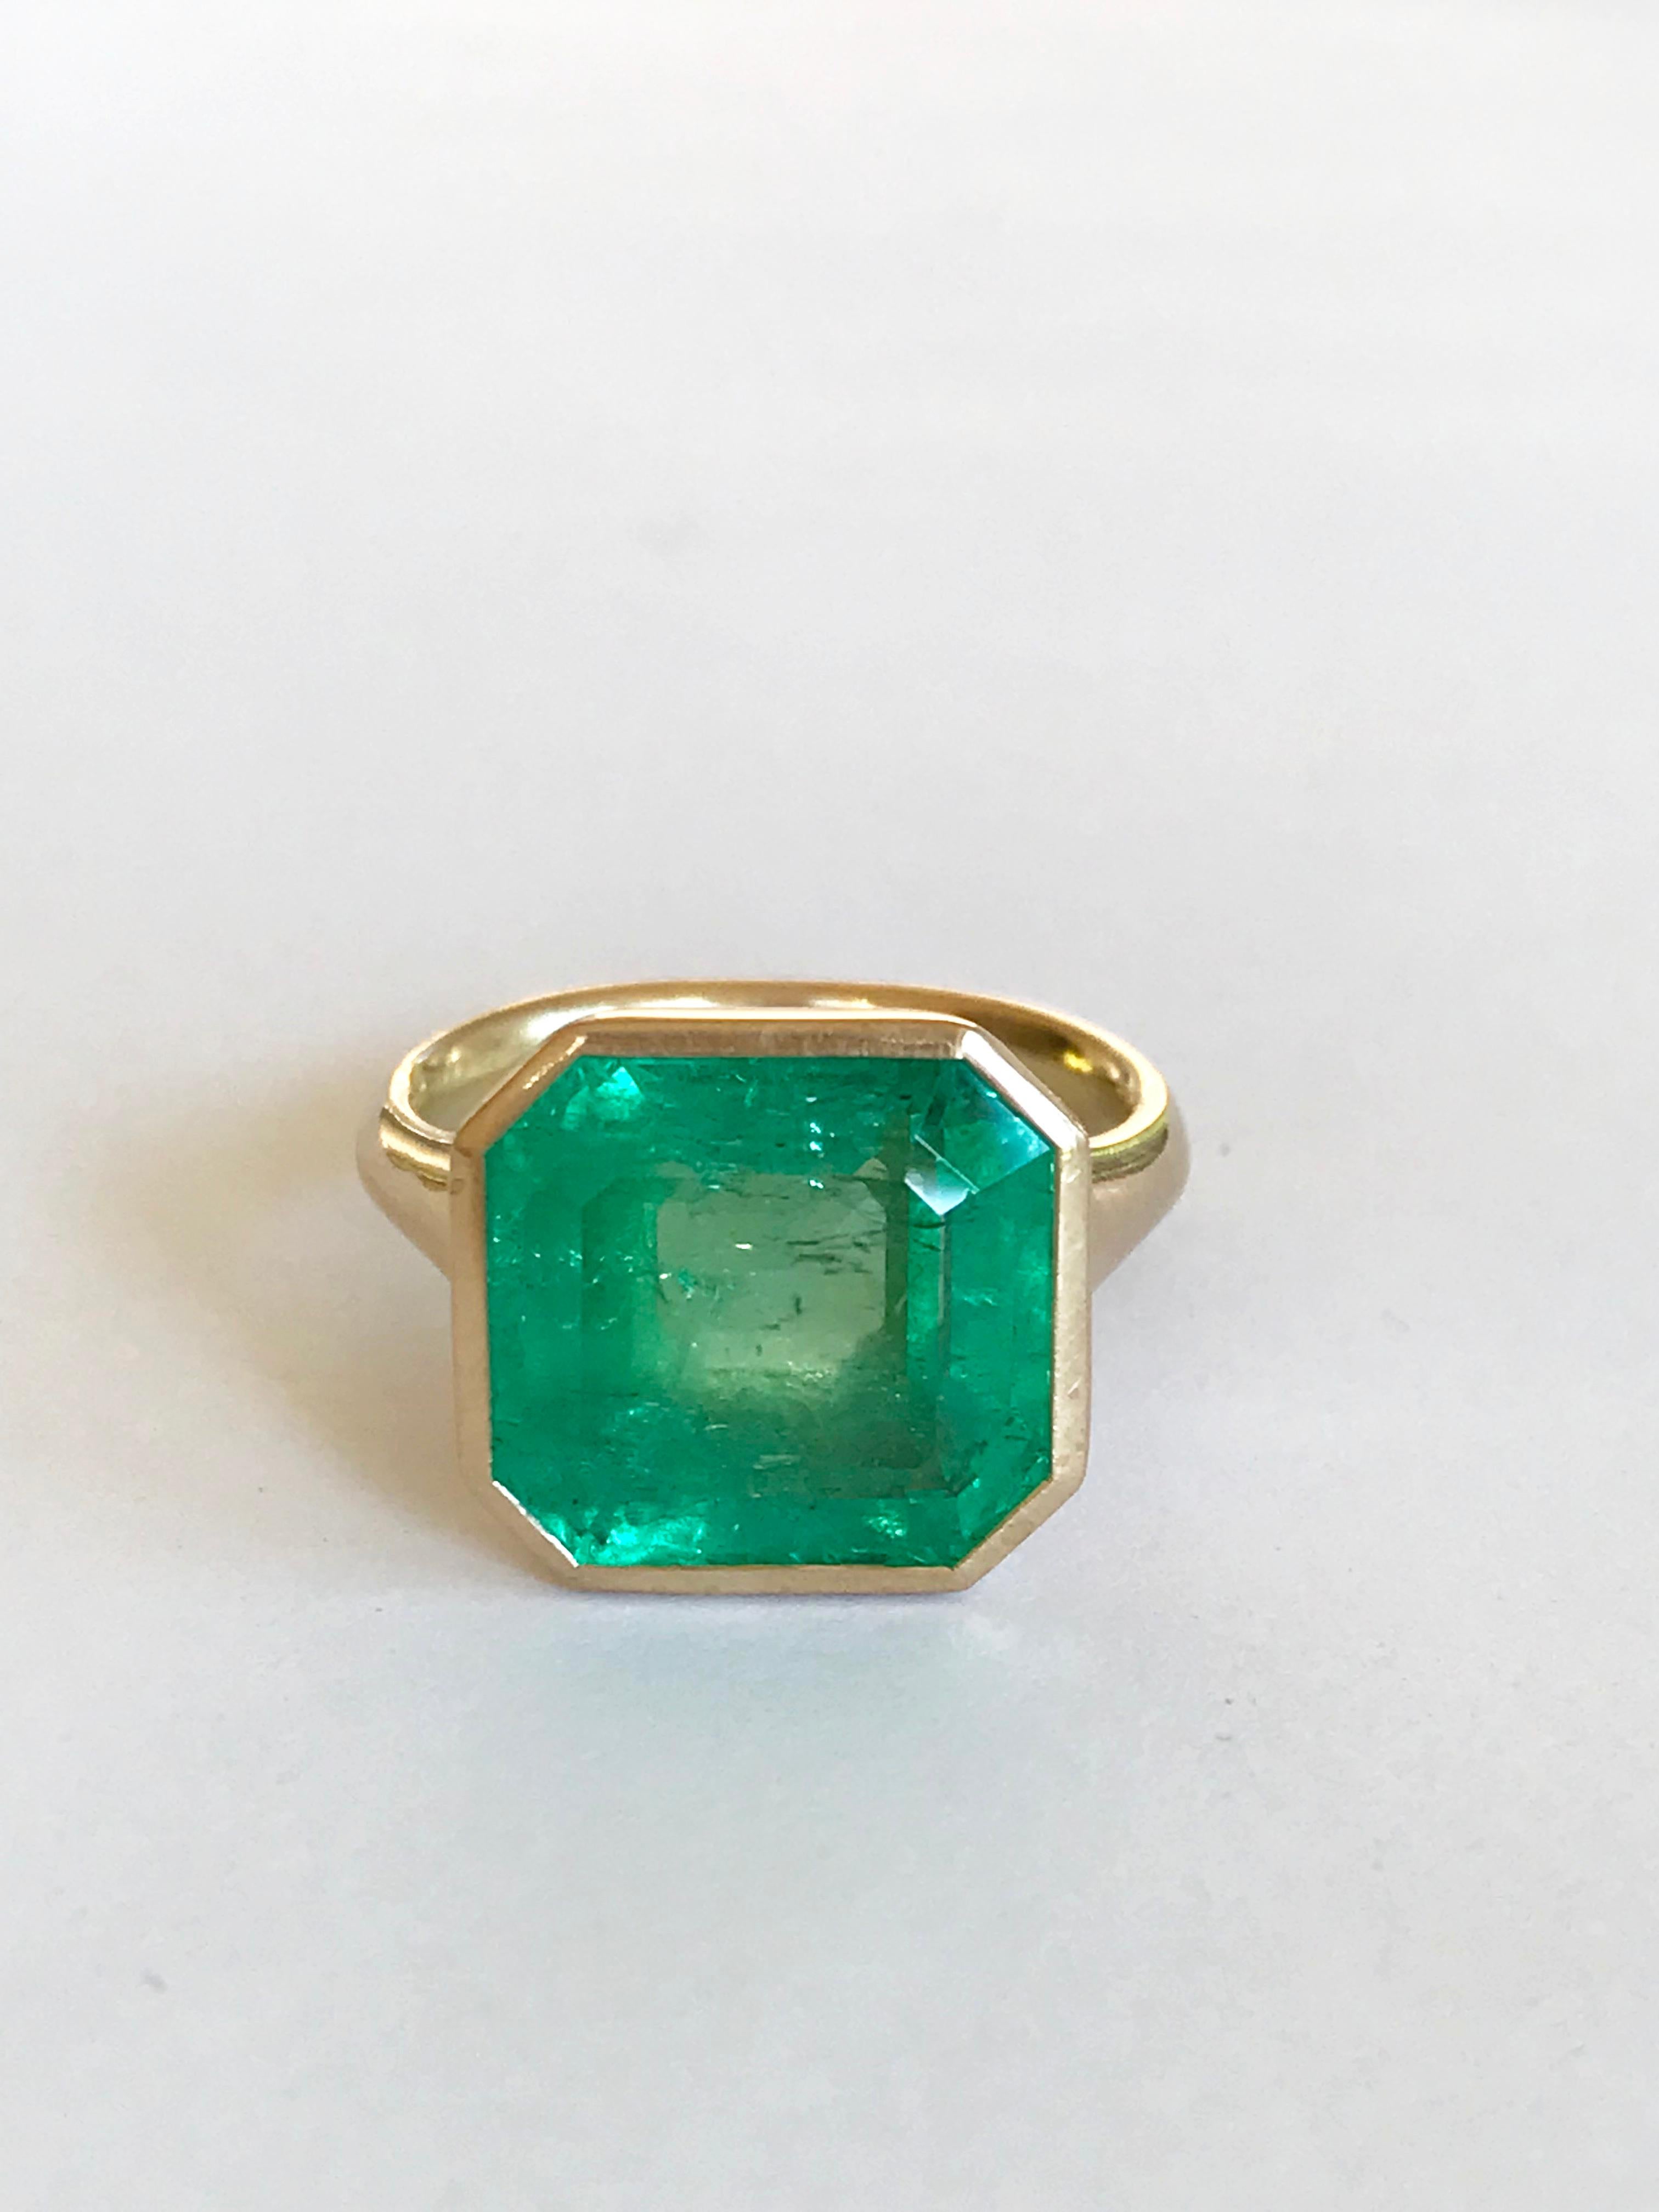 Contemporary Dalben Magnificent 9, 69 Carat Certified Colombian Emerald Yellow Gold Ring